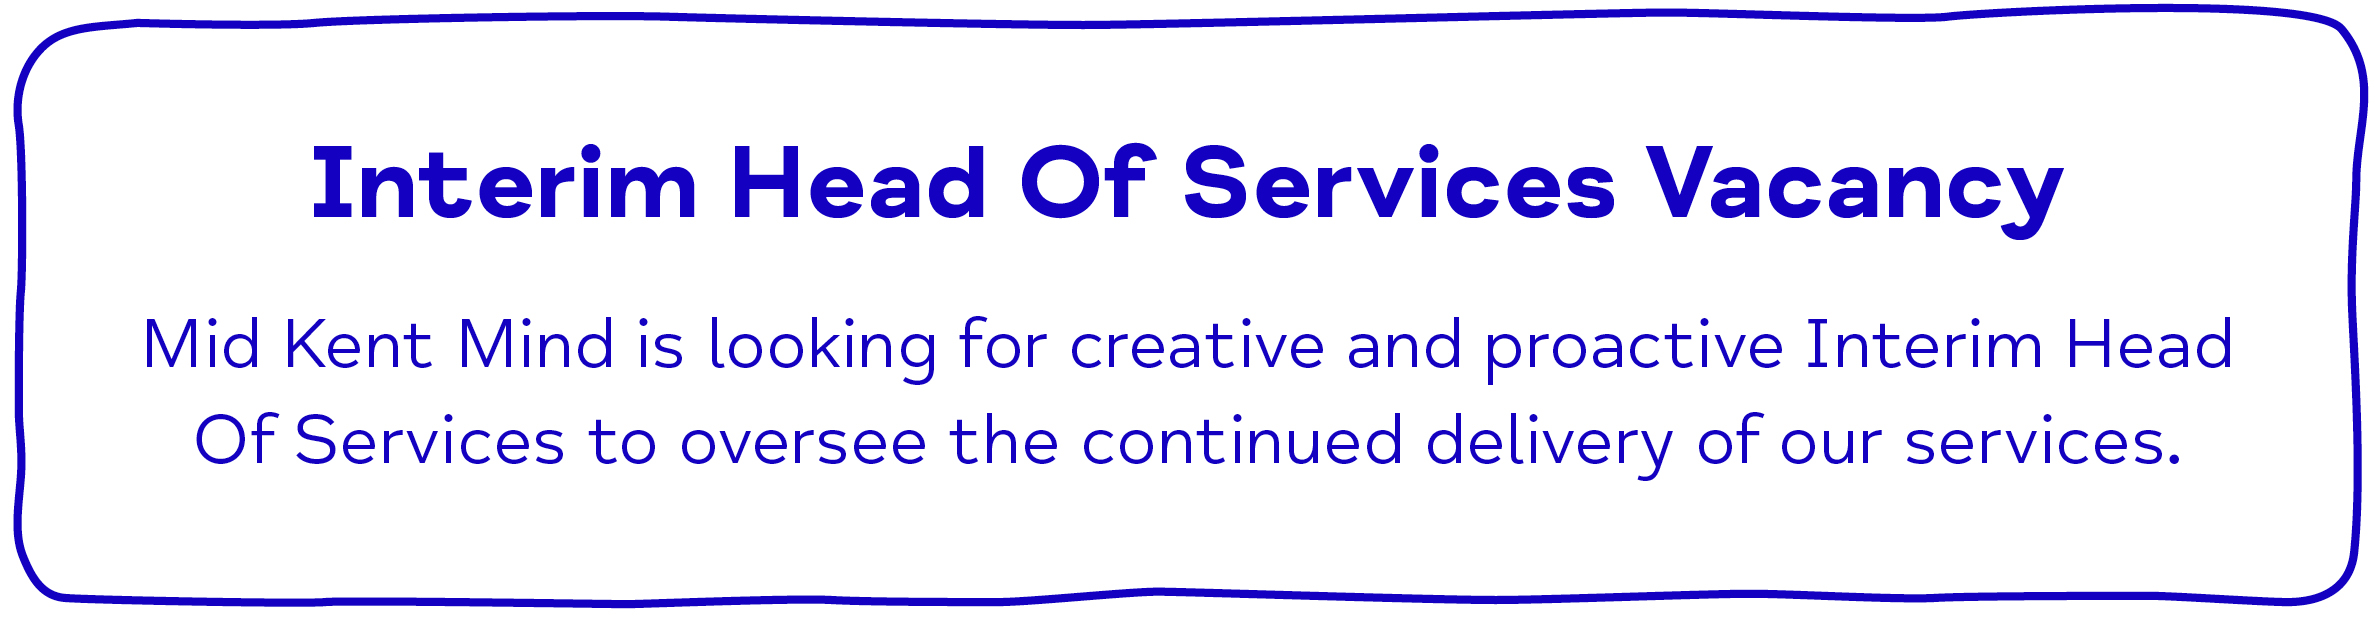 Interim Head Of Services Vacancy Mid Kent Mind is looking for creative and proactive Interim Head Of Services to oversee the continued delivery of our services.